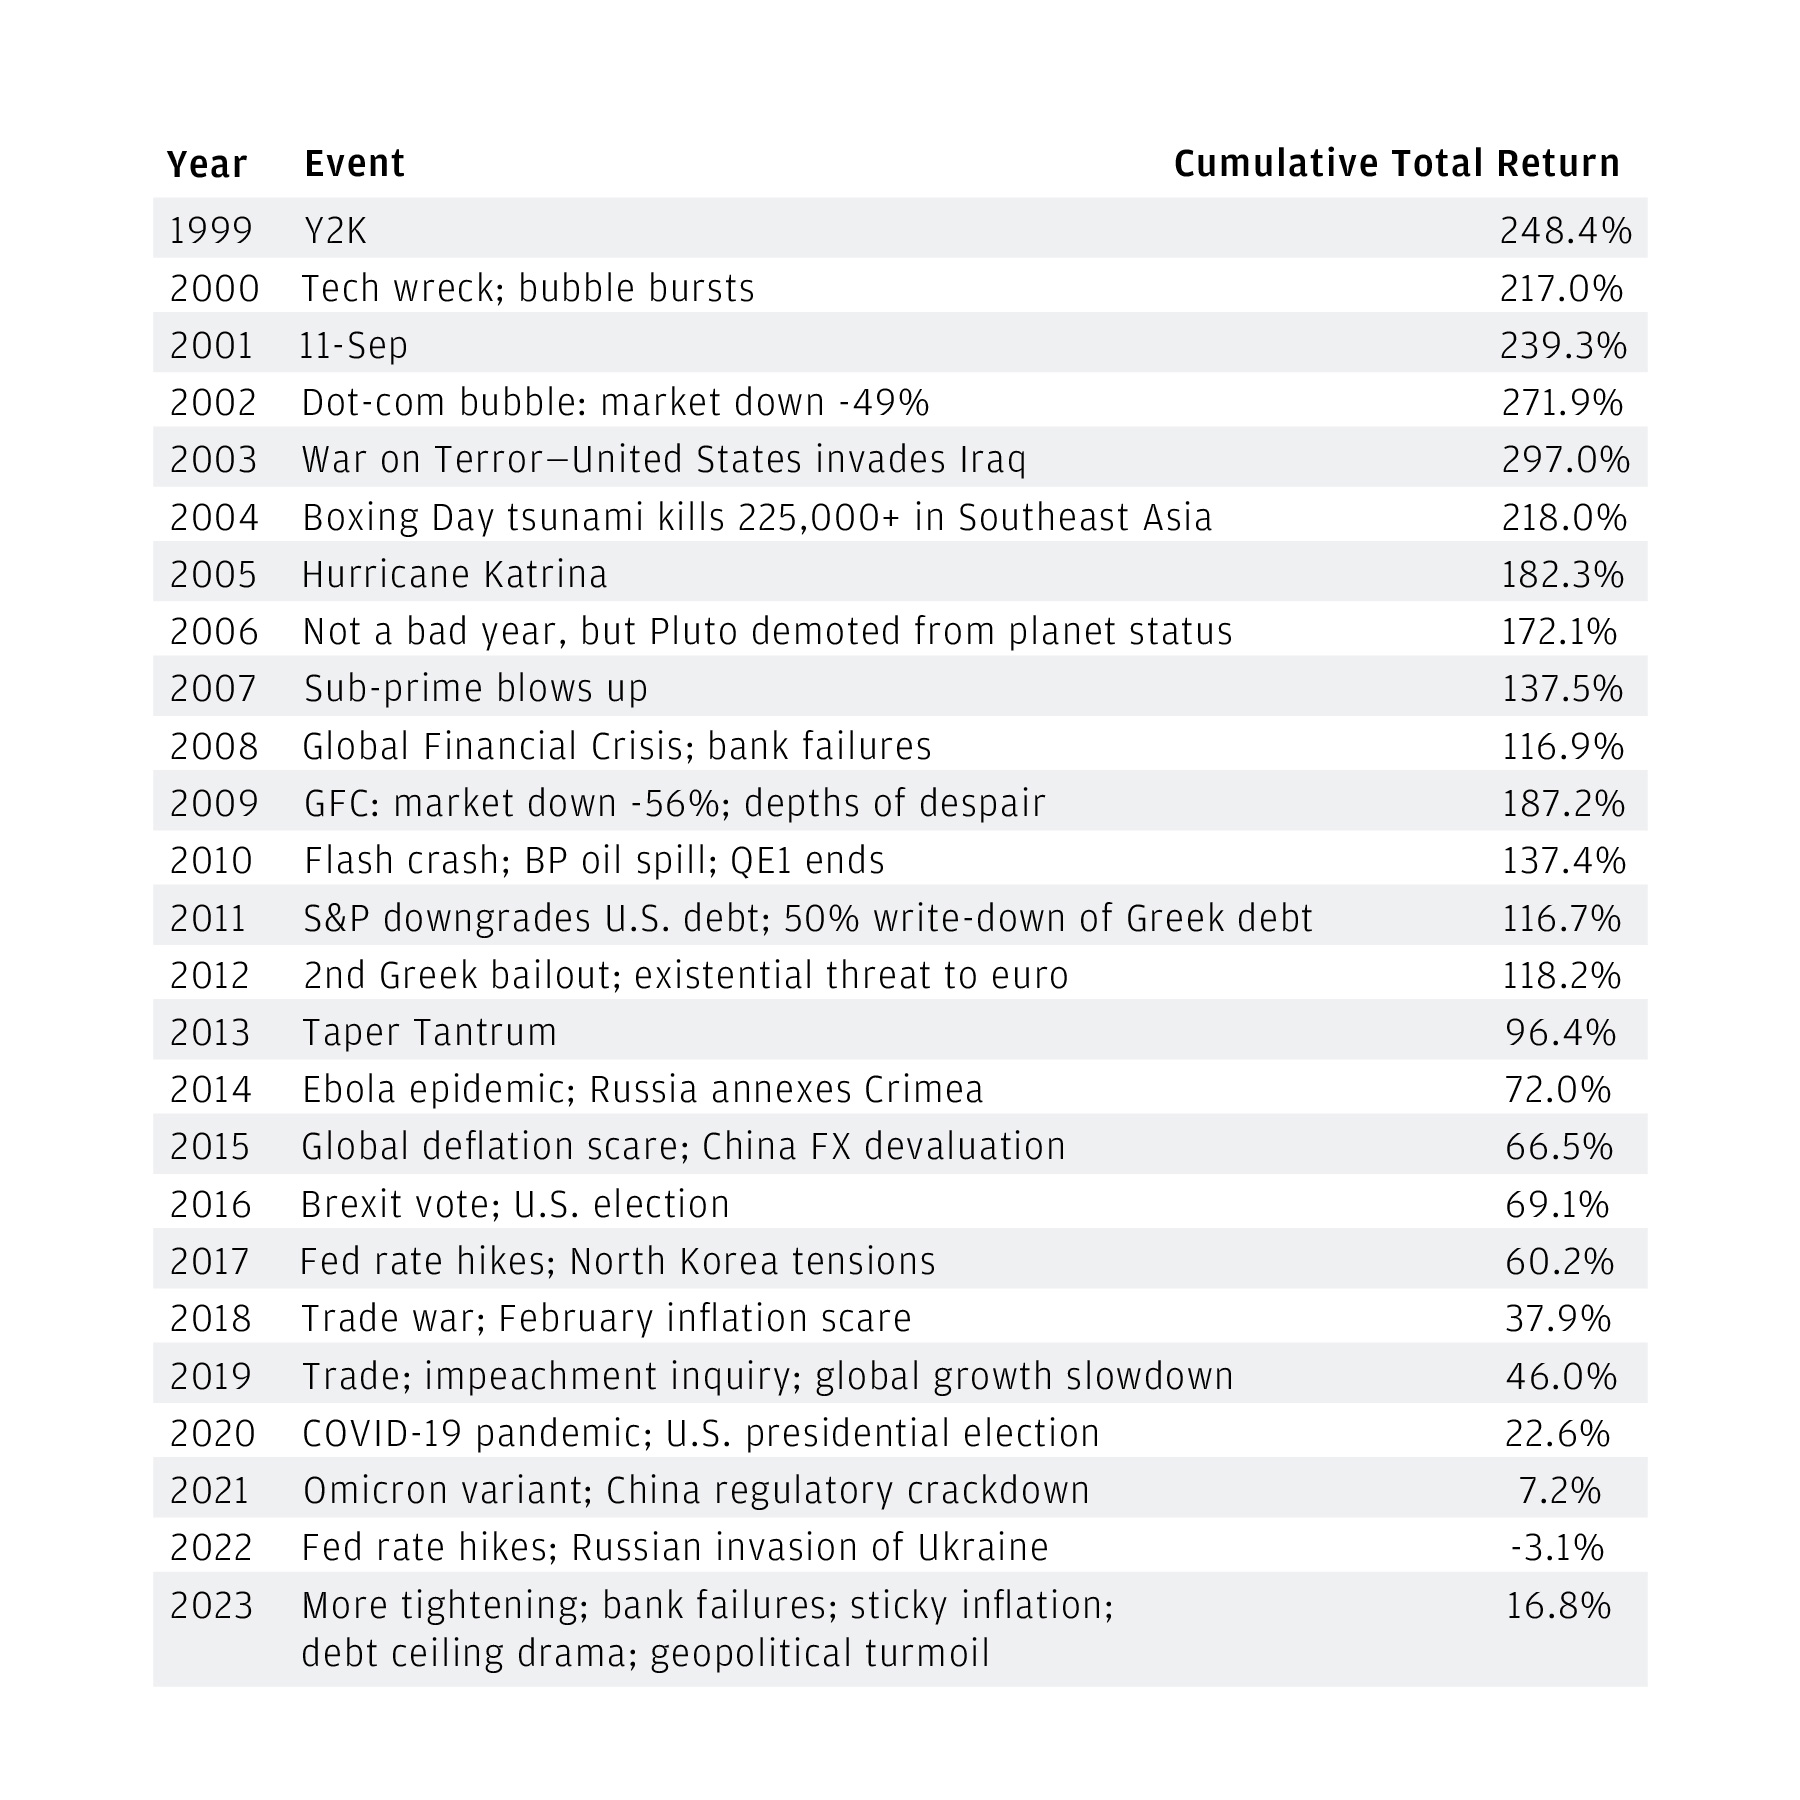 Listed are a number of world events, the year they occurred, and the cumulative total return. For example, Hurricane Katrina was in 2005 and the cumulative total return was 180.9%. The chart implies that investment portfolios are built to last. 